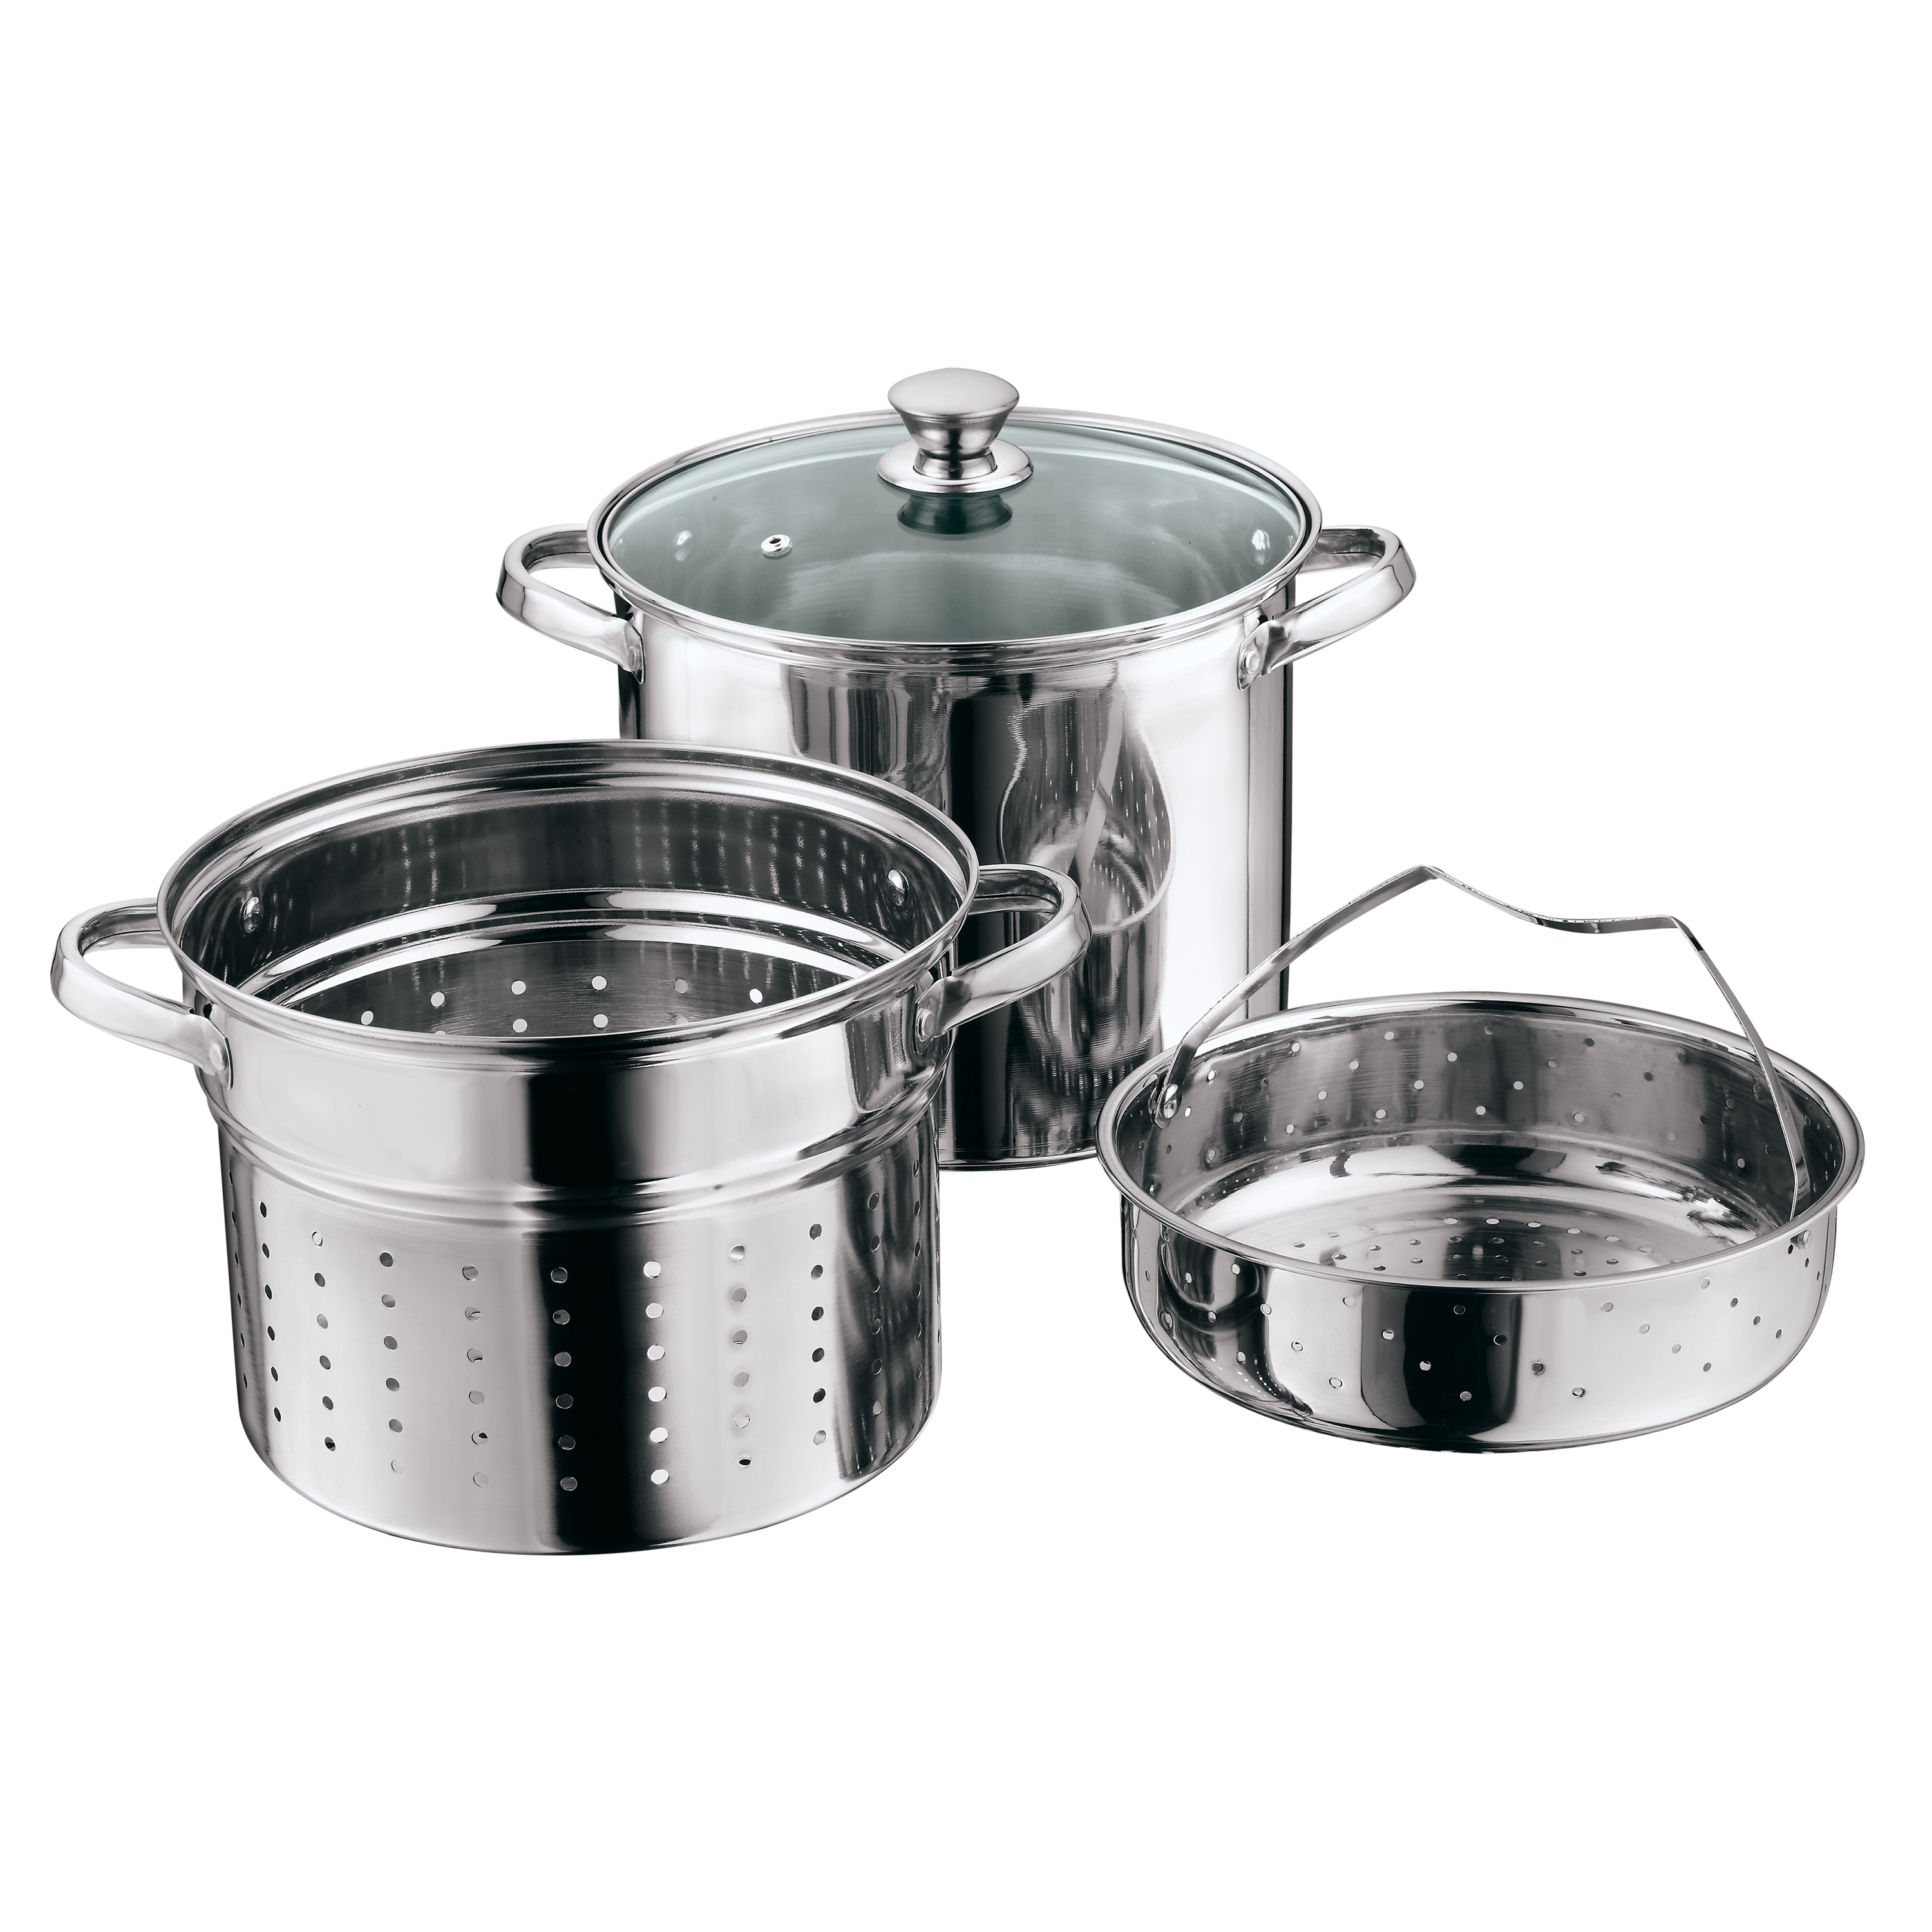 Mainstays Stainless Steel 8 Quart Multi-Cooker Stock pot with Lid - image 1 of 6